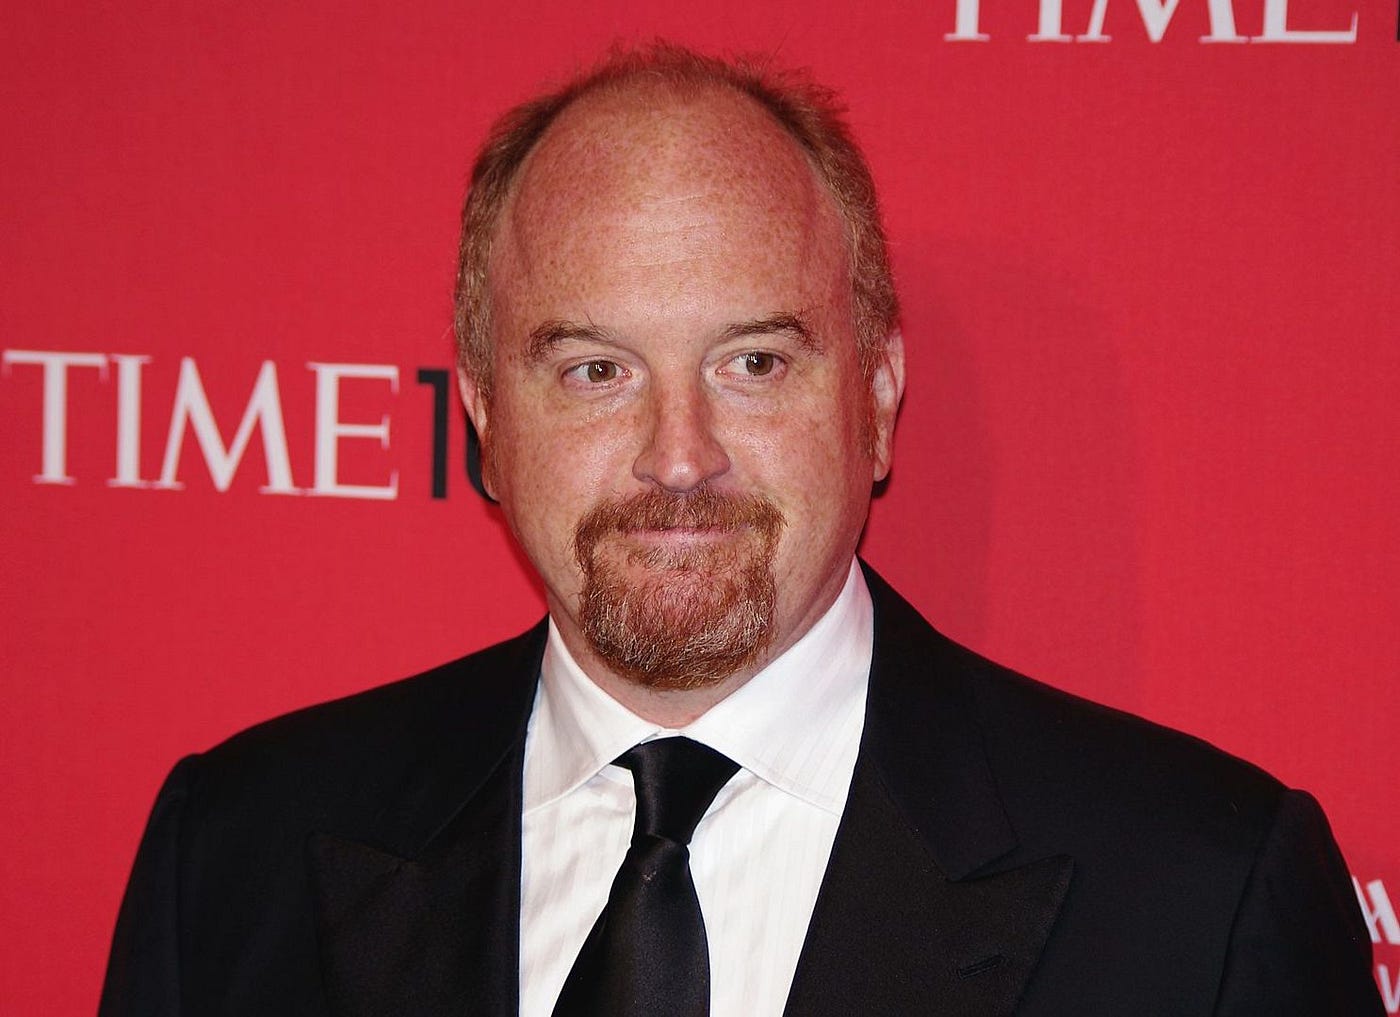 Everyone is LAUGHING But I'm FOCUSED on THIS INSTEAD!, Louis C.K.